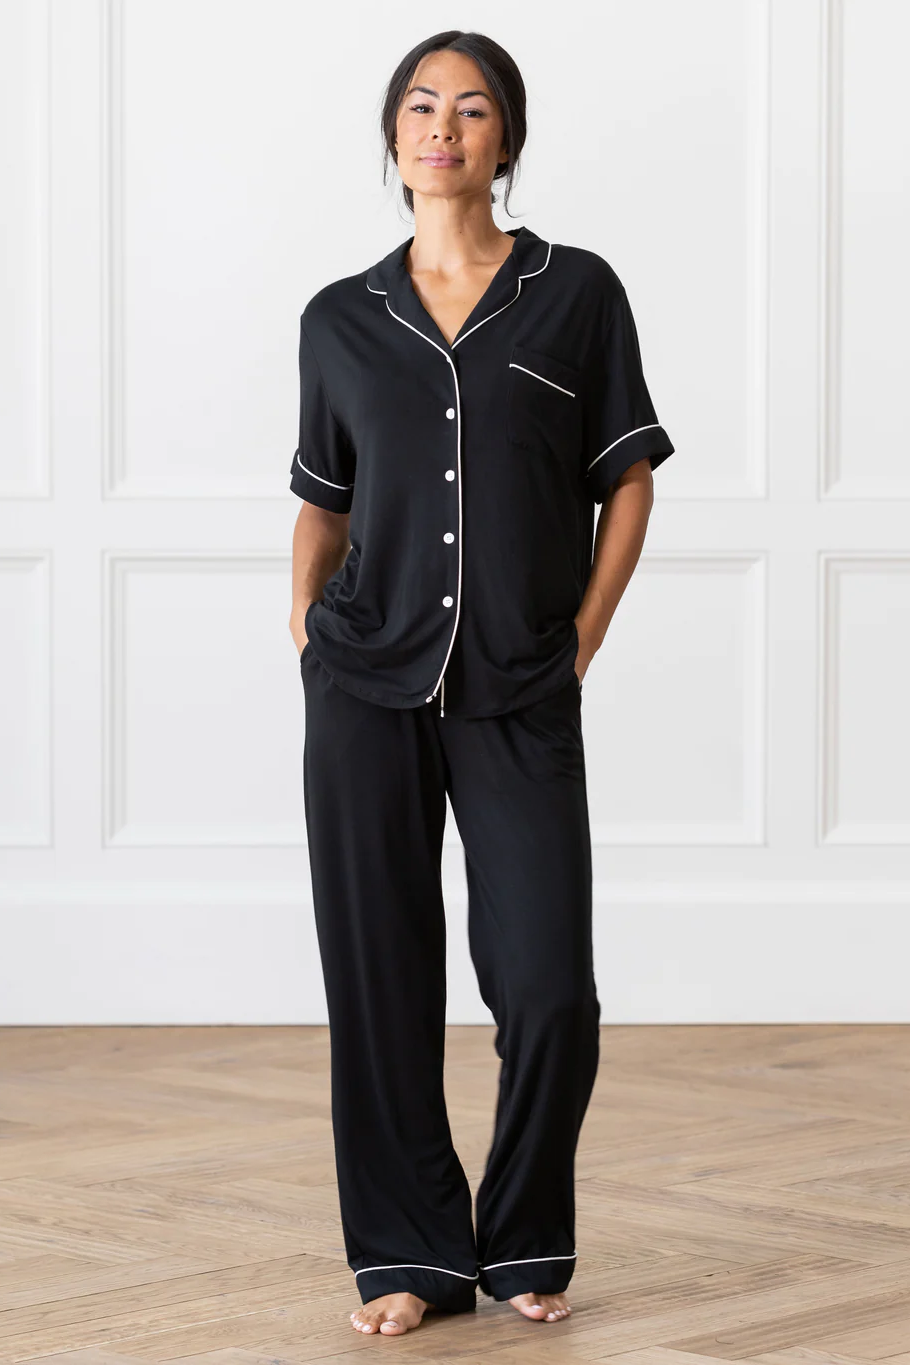 The 7 Best Menopause Pajamas To Cool Those Night Sweats - The